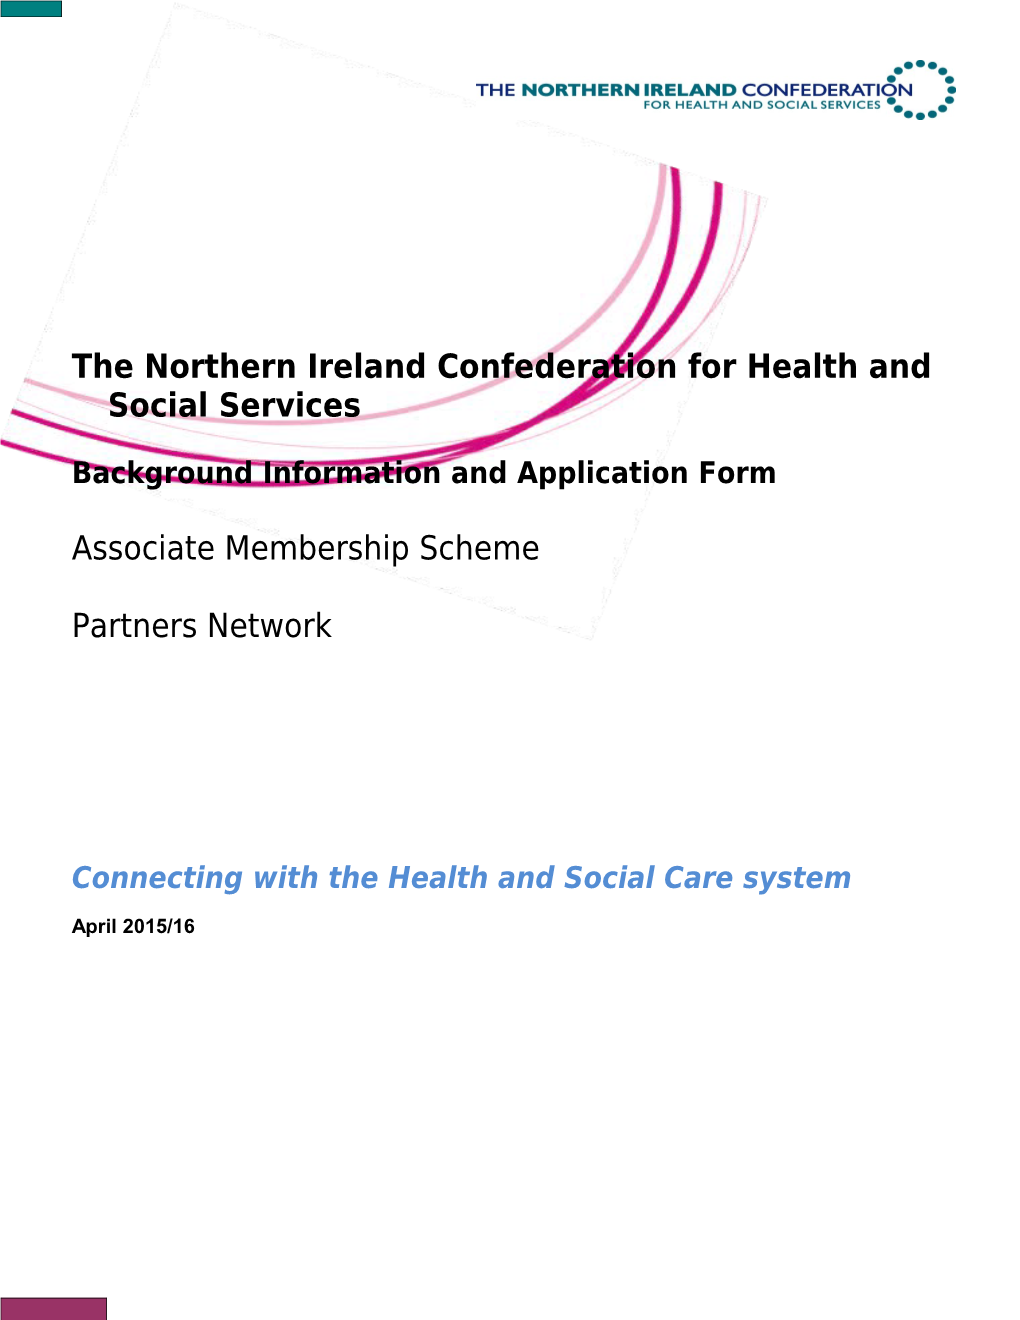 The Northern Ireland Confederation for Health and Social Services